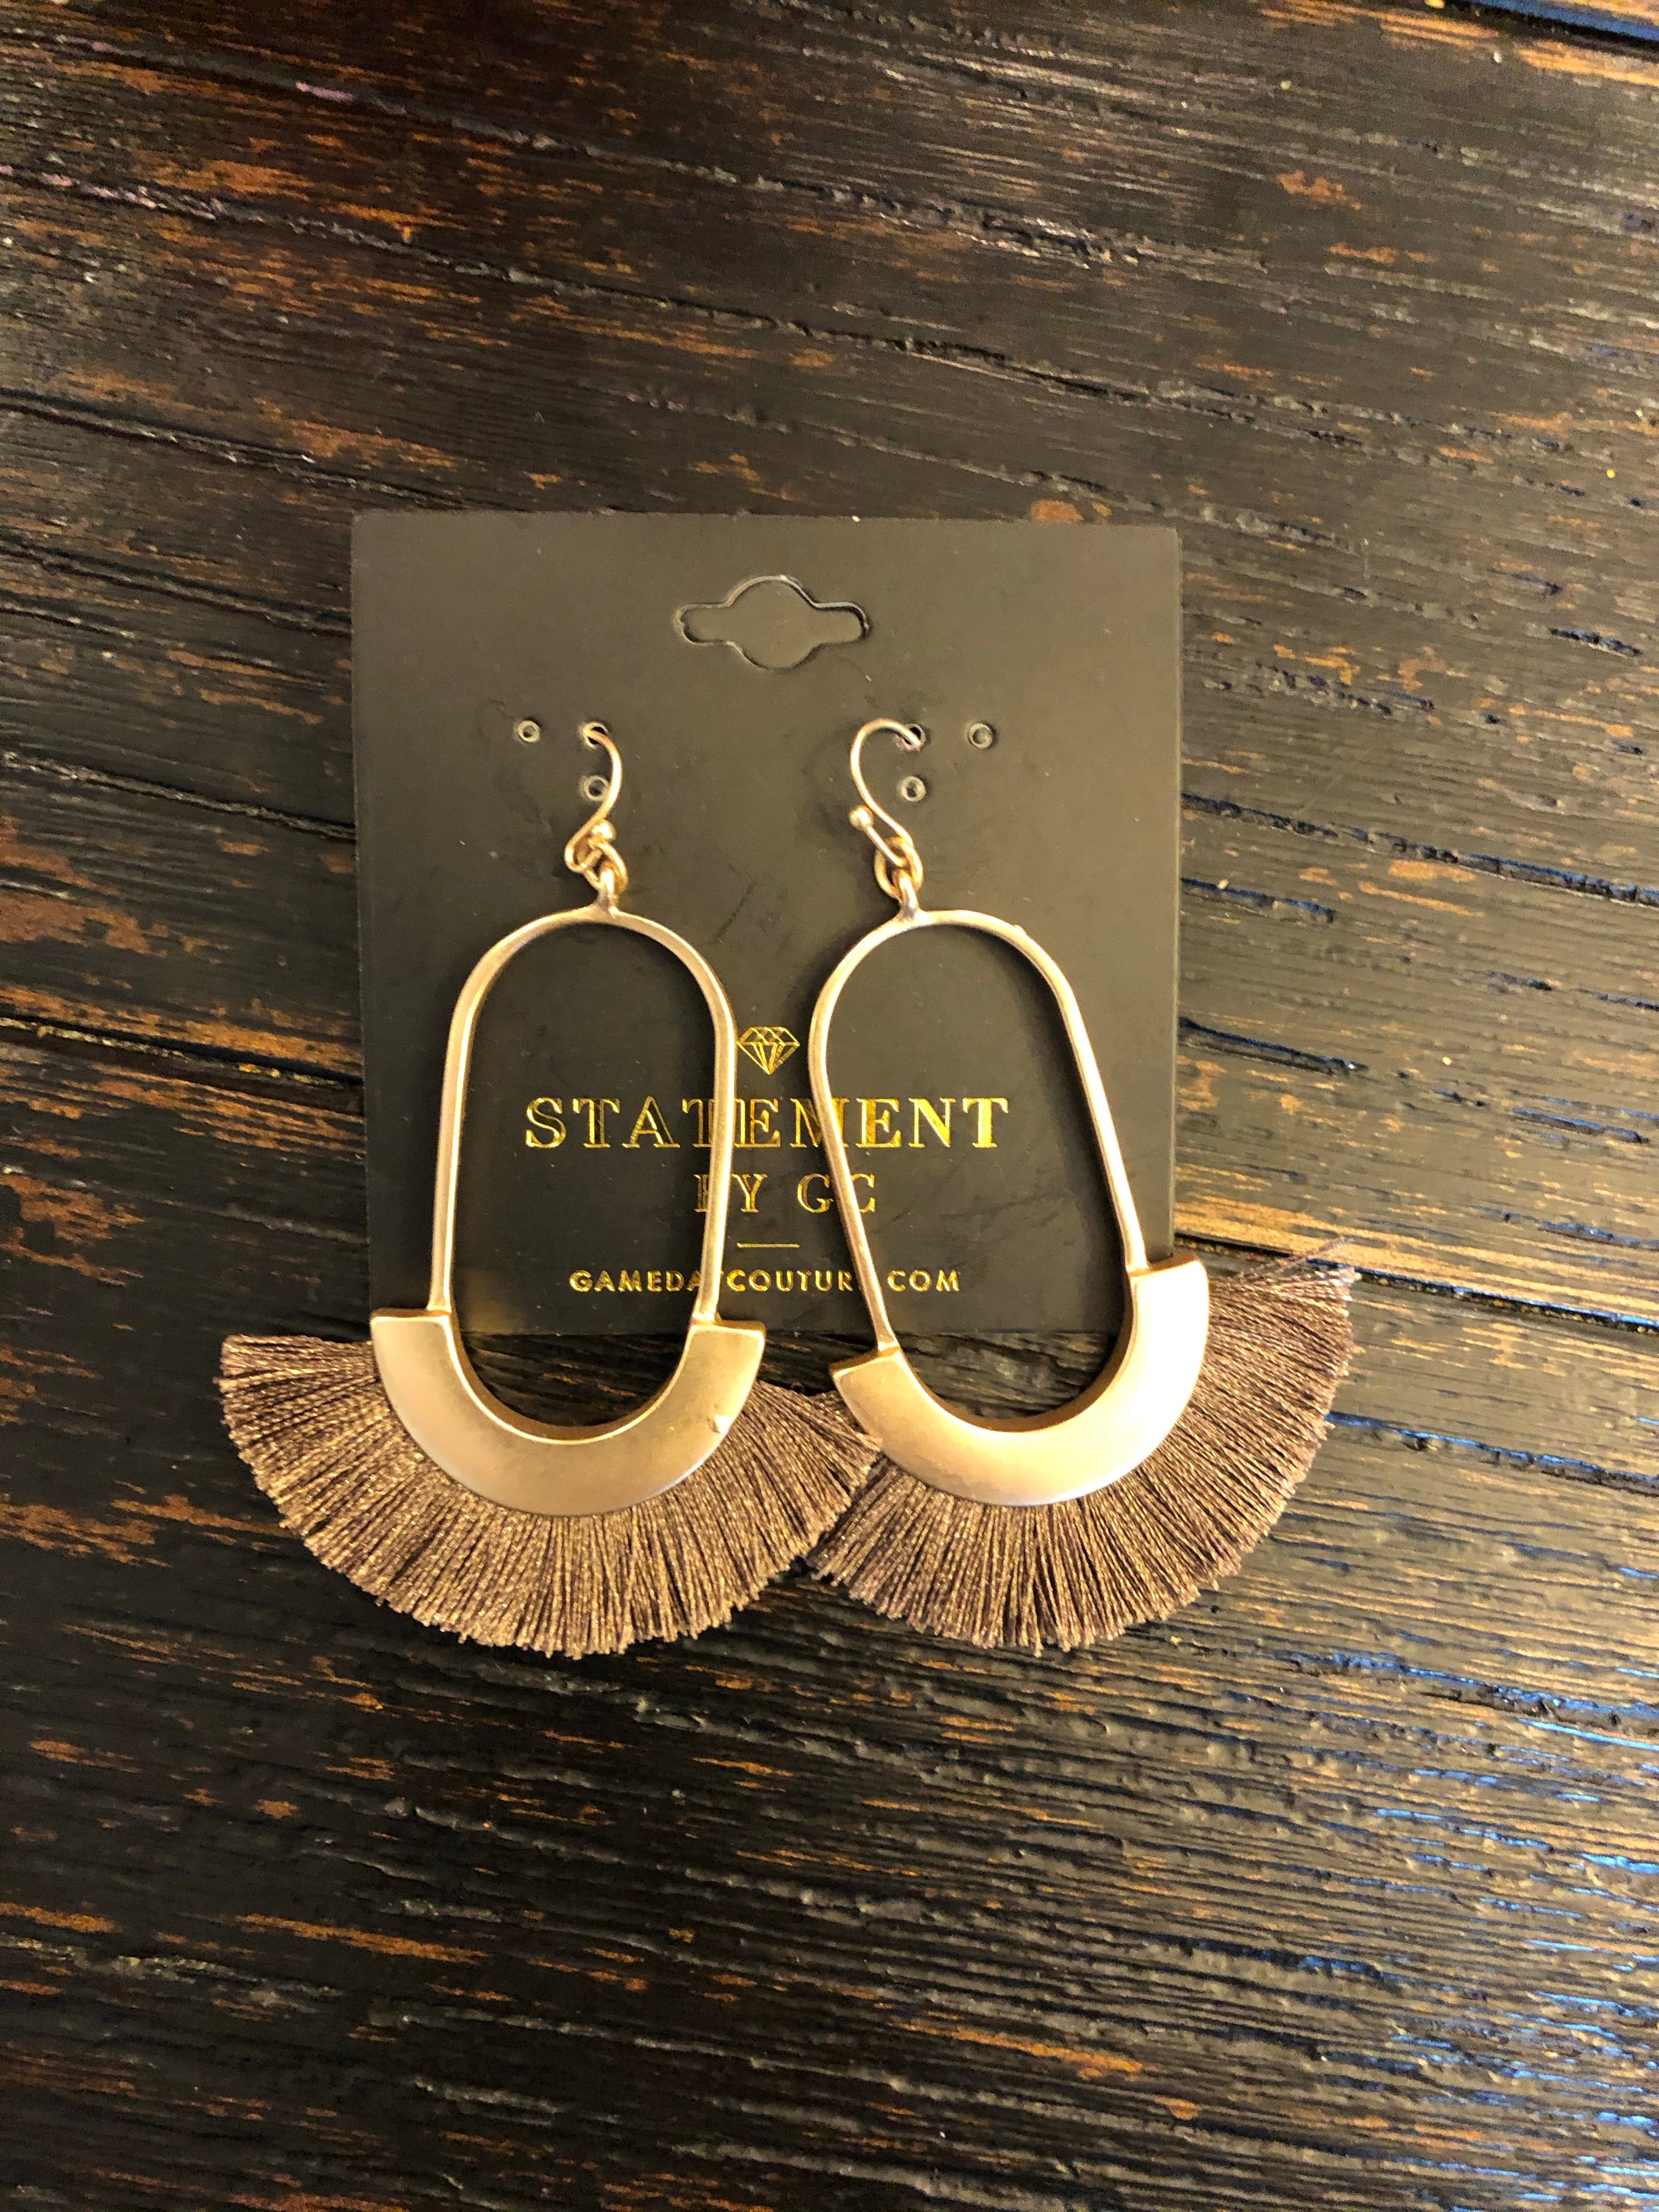 Brushed gold with fringe earrings